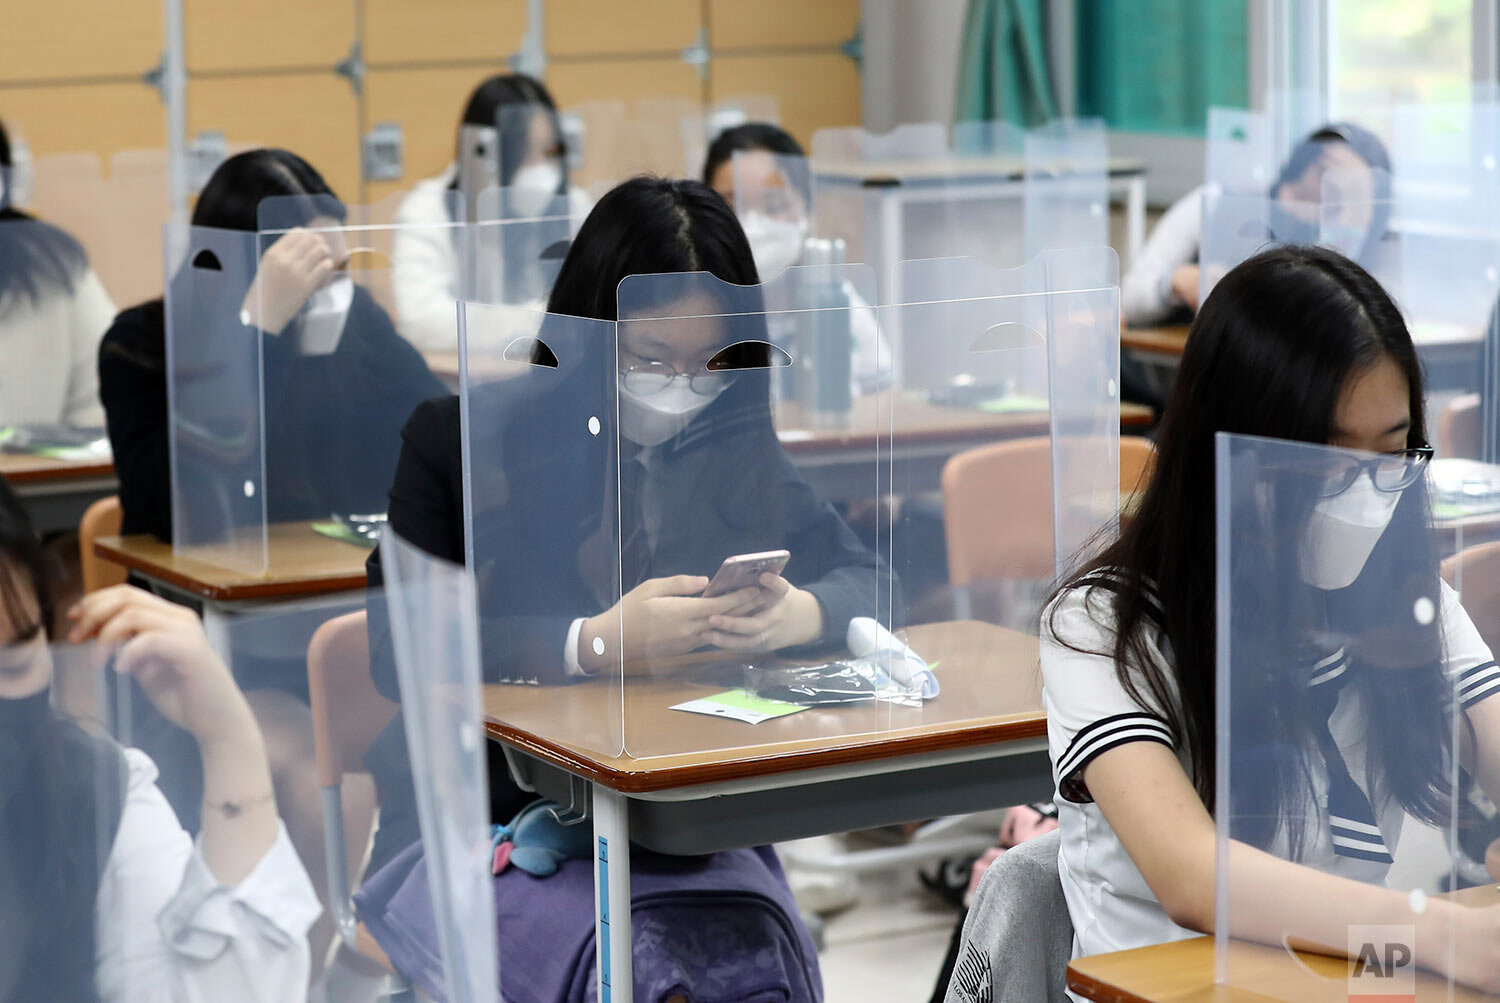  Senior students wait for class to begin with plastic boards placed on their desks at Jeonmin High School in Daejeon, South Korea, Wednesday, May 20, 2020.  (Kim Jun-beom/Yonhap via AP) 